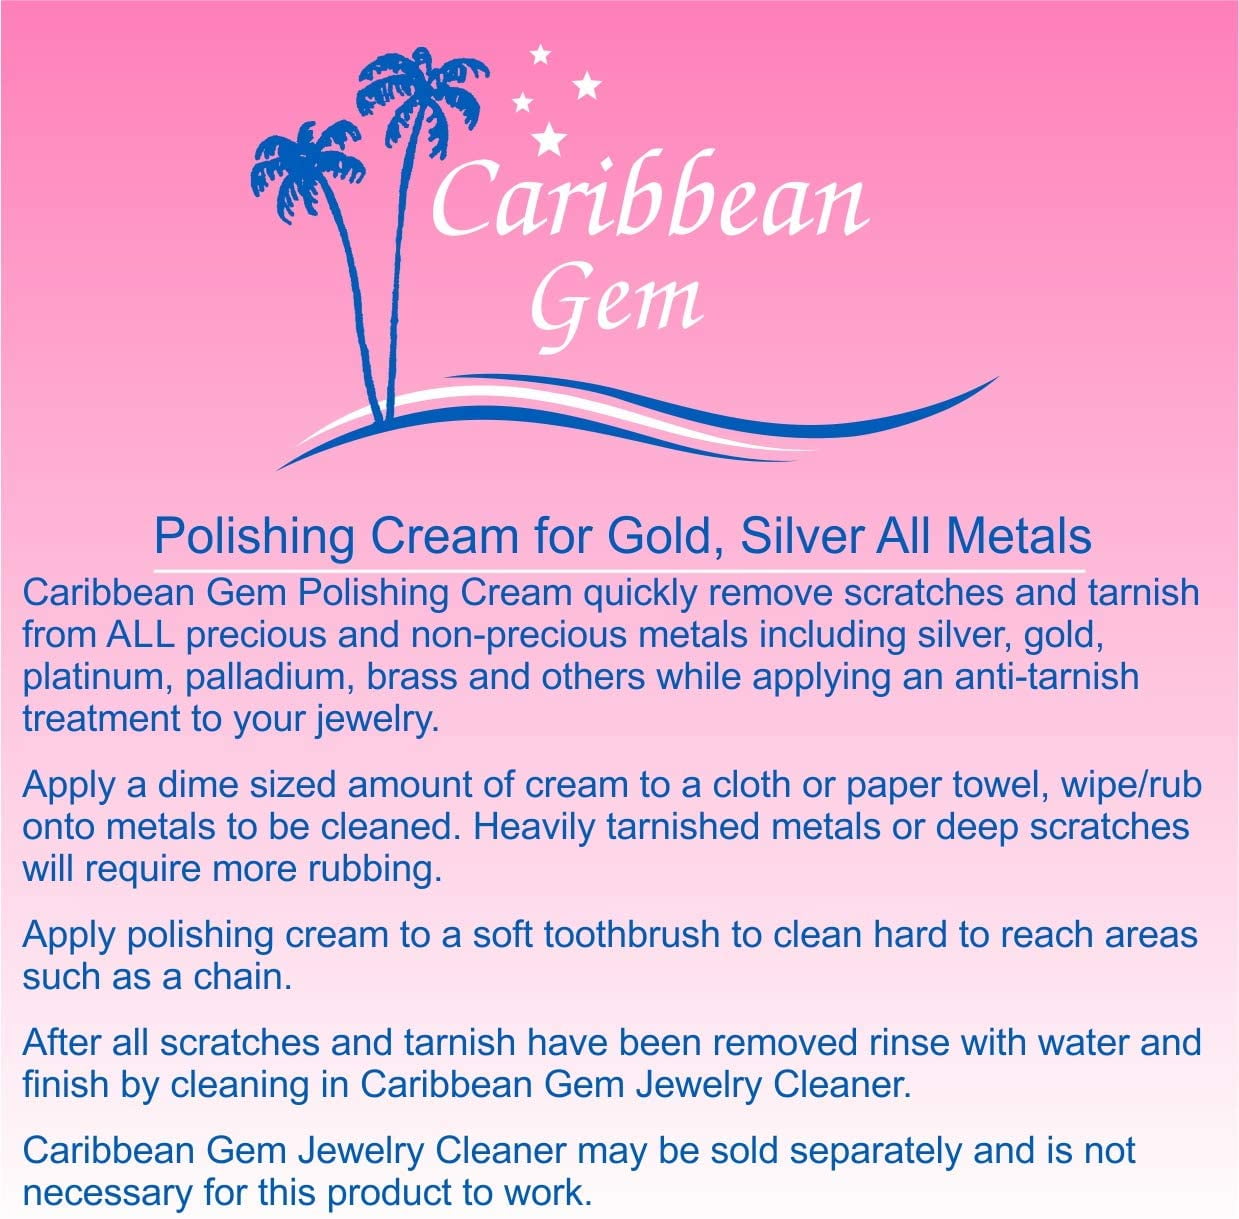 Caribbean Gem Jewelry Cleaner - All About Metals Kit Polish Silver